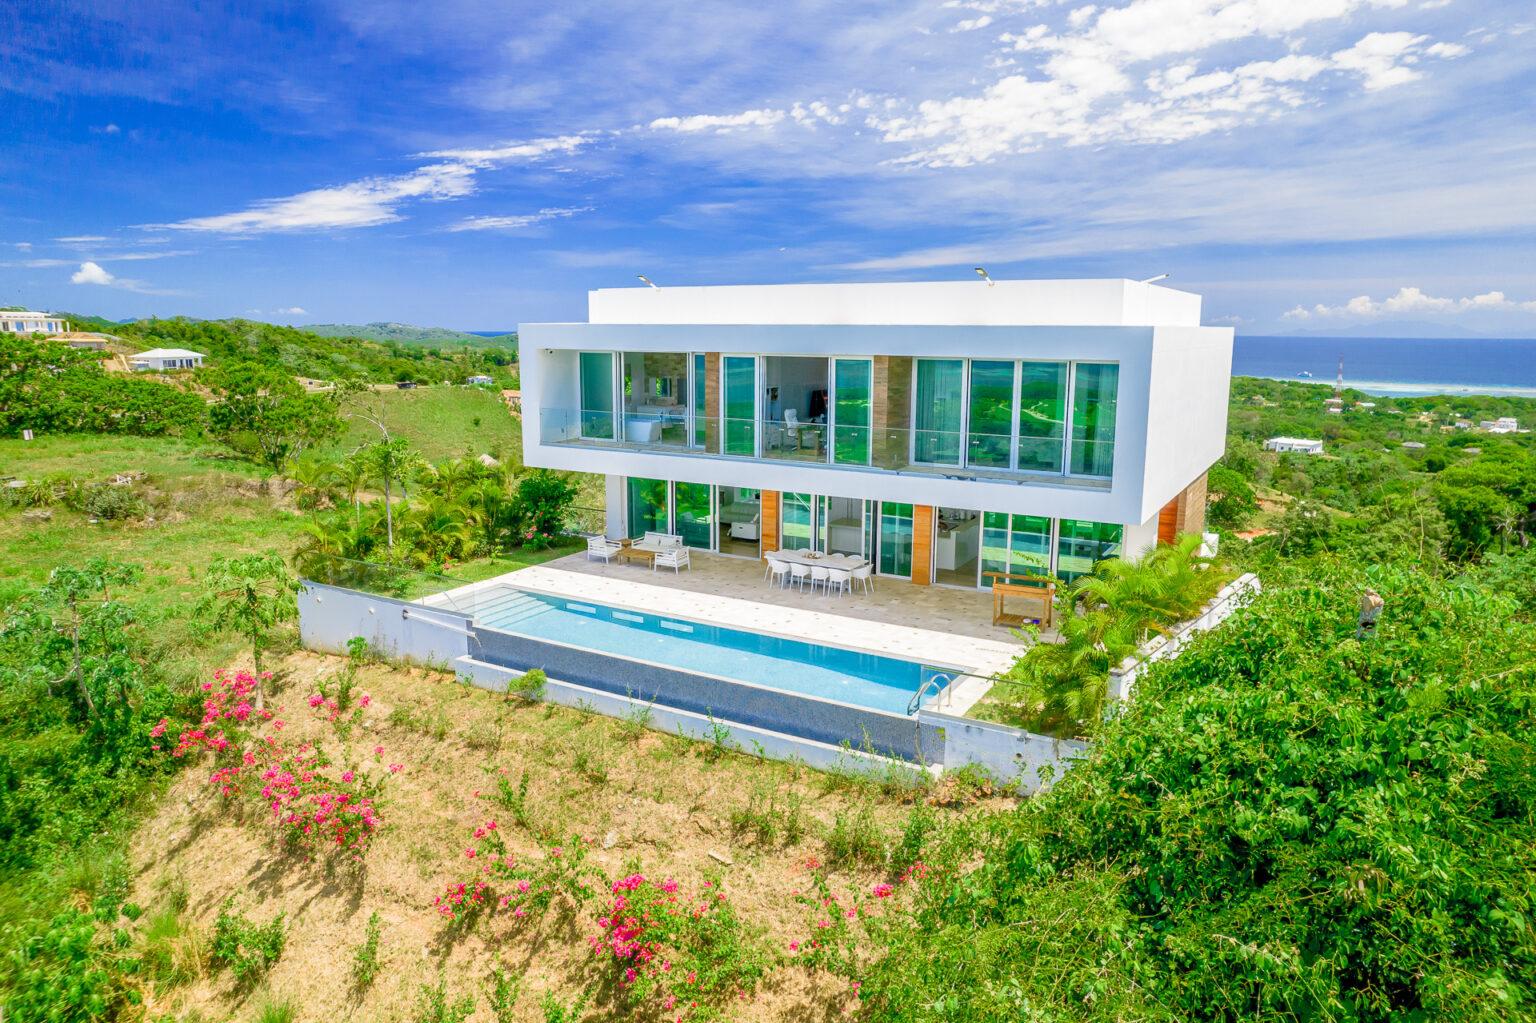 Featured Roatan Real Estate Listings, Roatan Homes for Sale, Opulent Seven Bed Home on Lot 4 in Coral Views Village, Roatan Luxury Properties